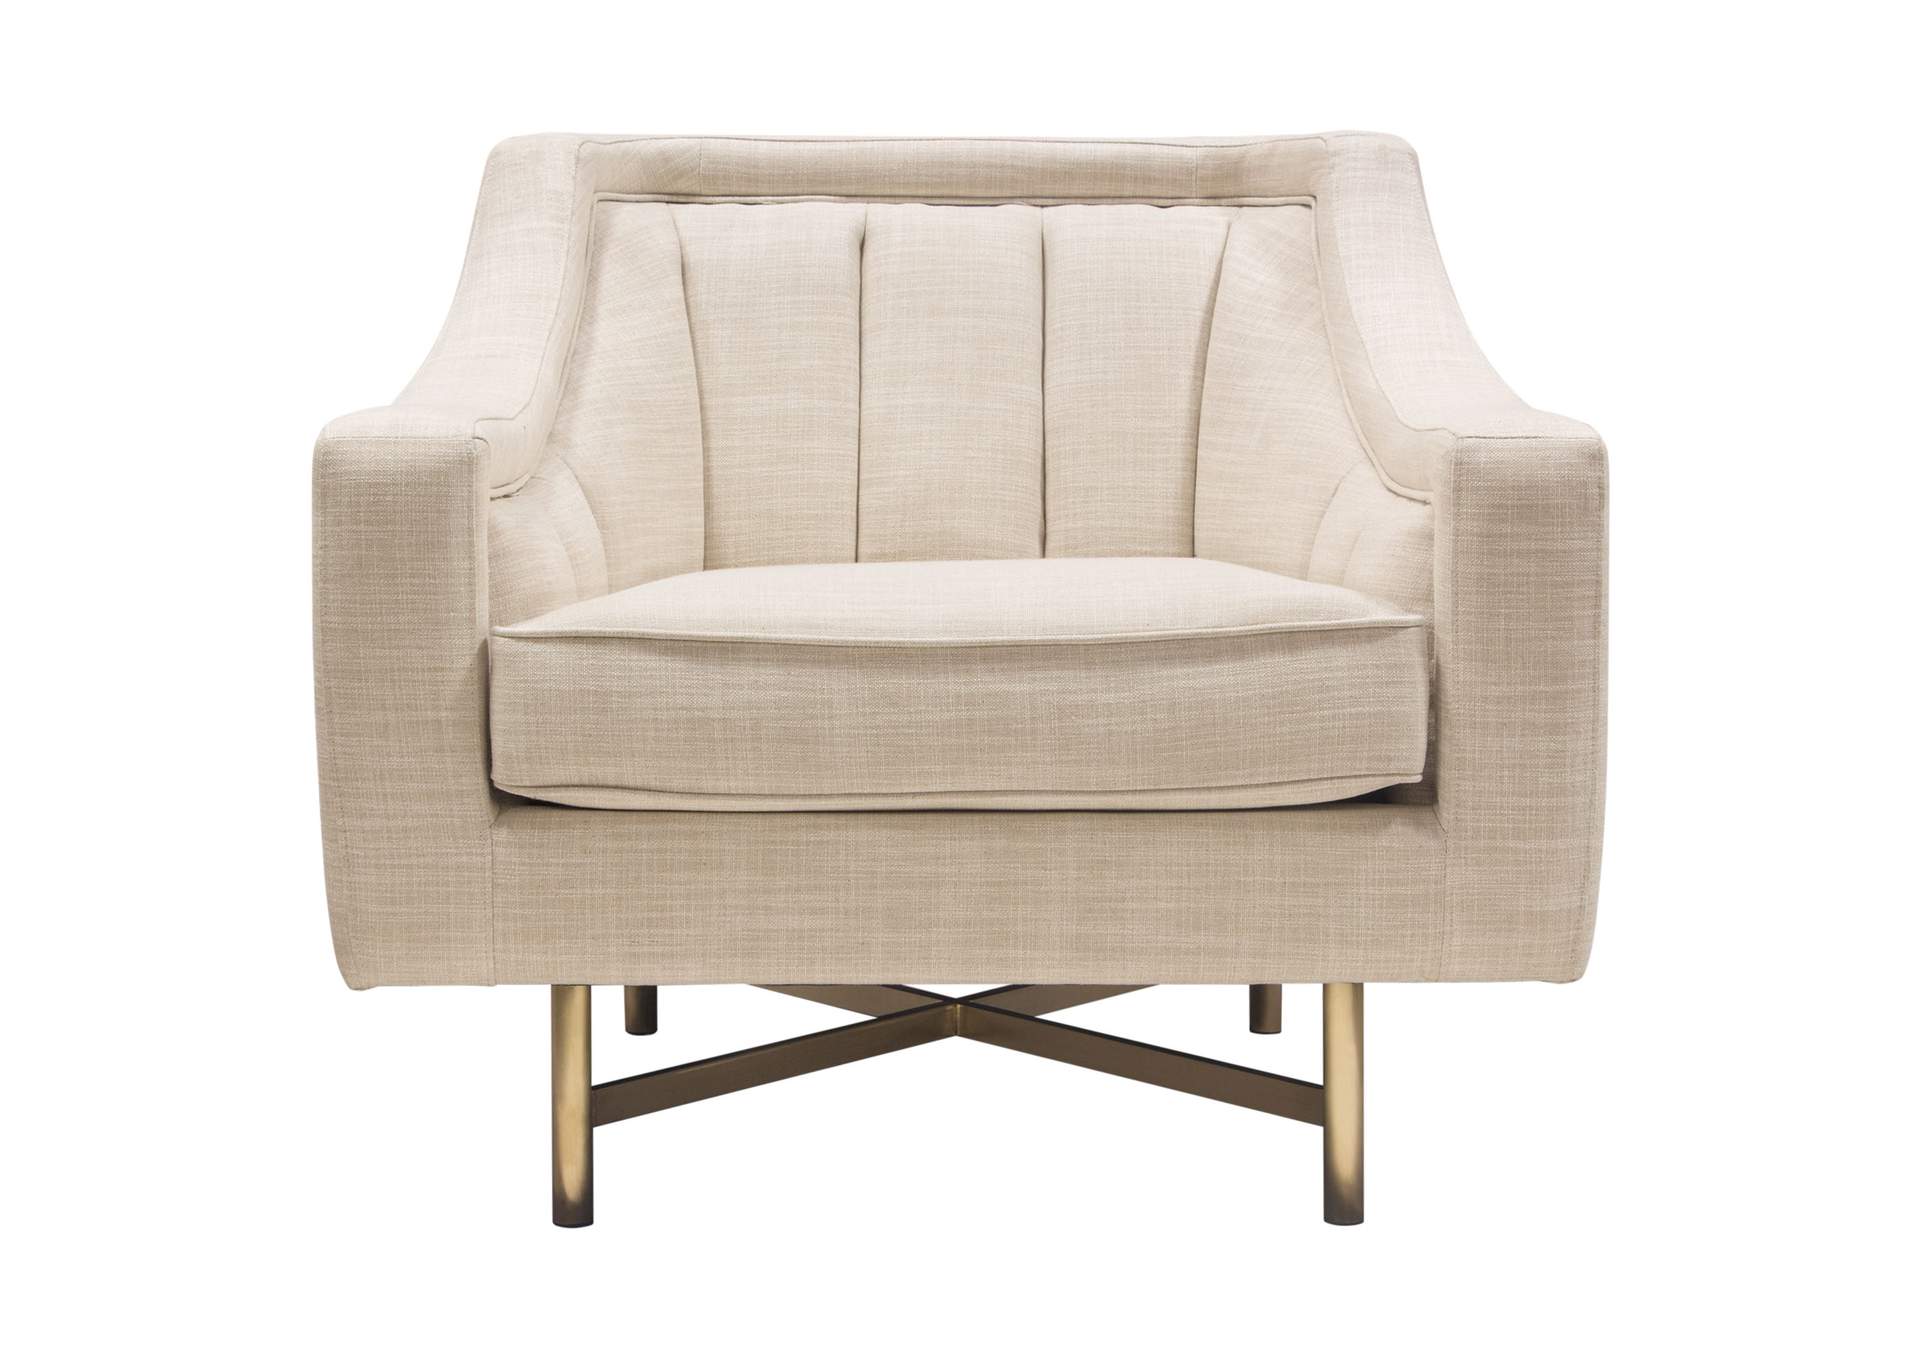 Croft Fabric Chair in Sand Linen Fabric w/ Accent Pillow and Gold Metal Criss-Cross Frame by Diamond Sofa,Diamond Sofa